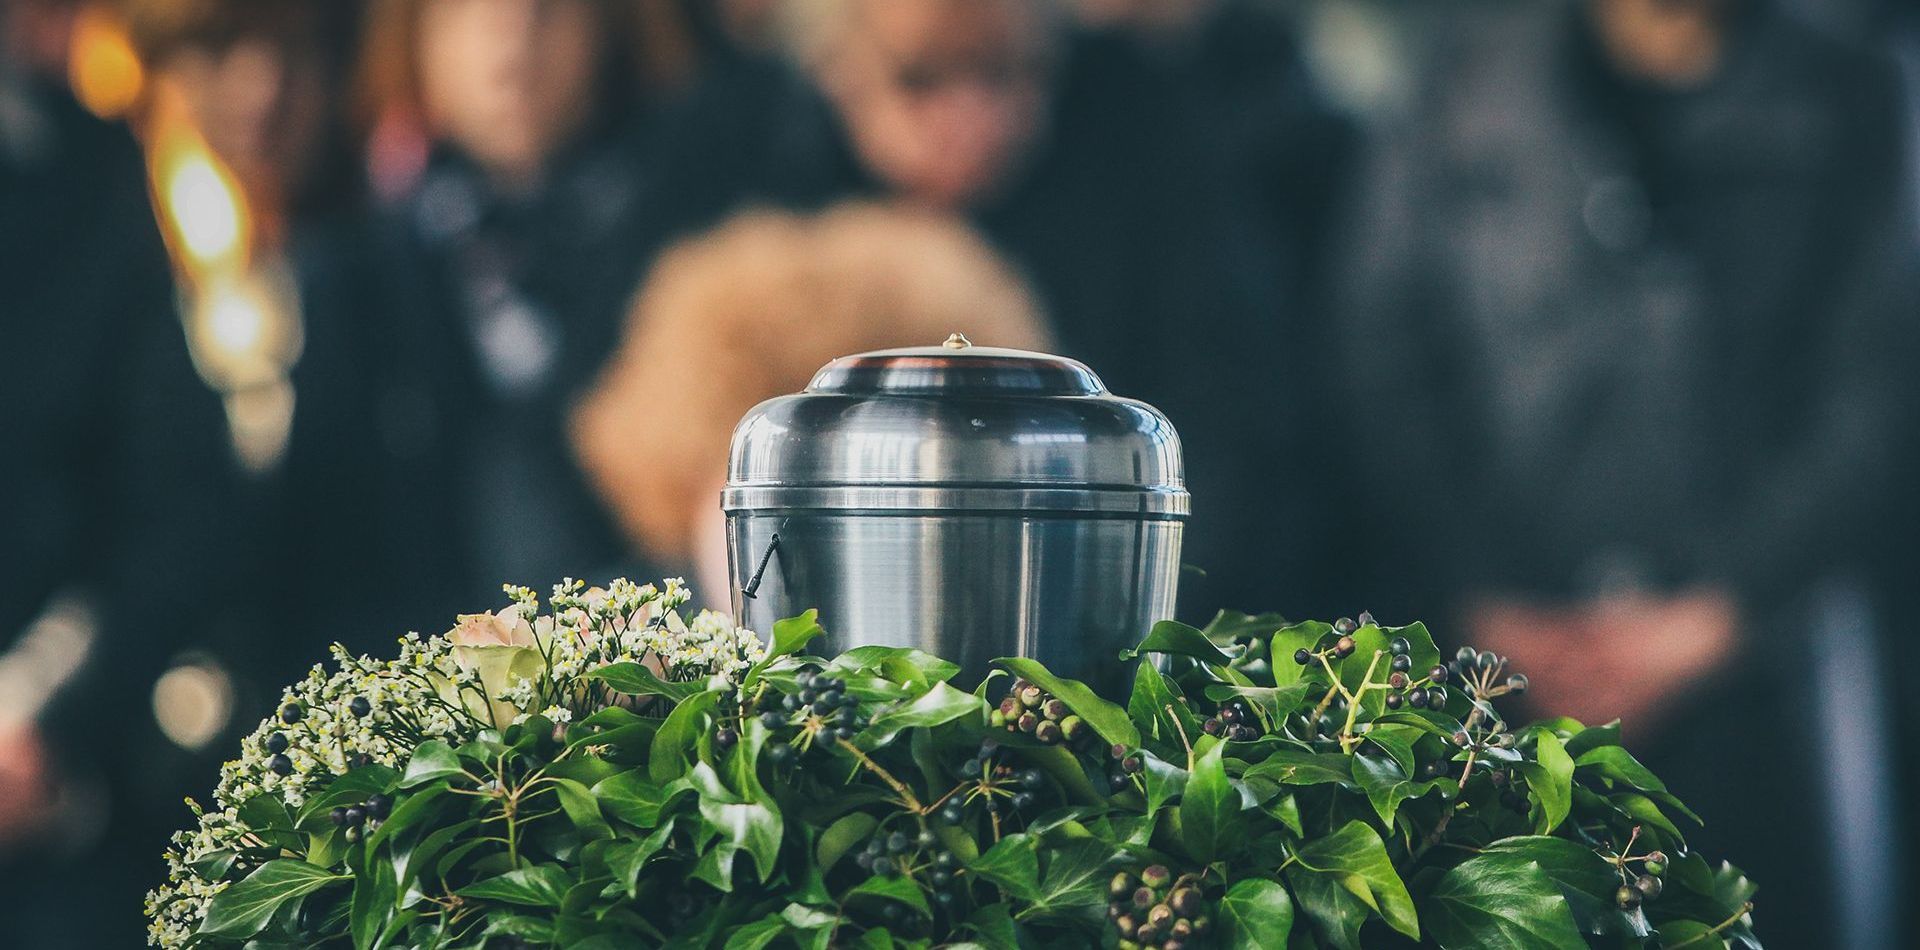 a silver urn is surrounded by flowers and leaves at a funeral